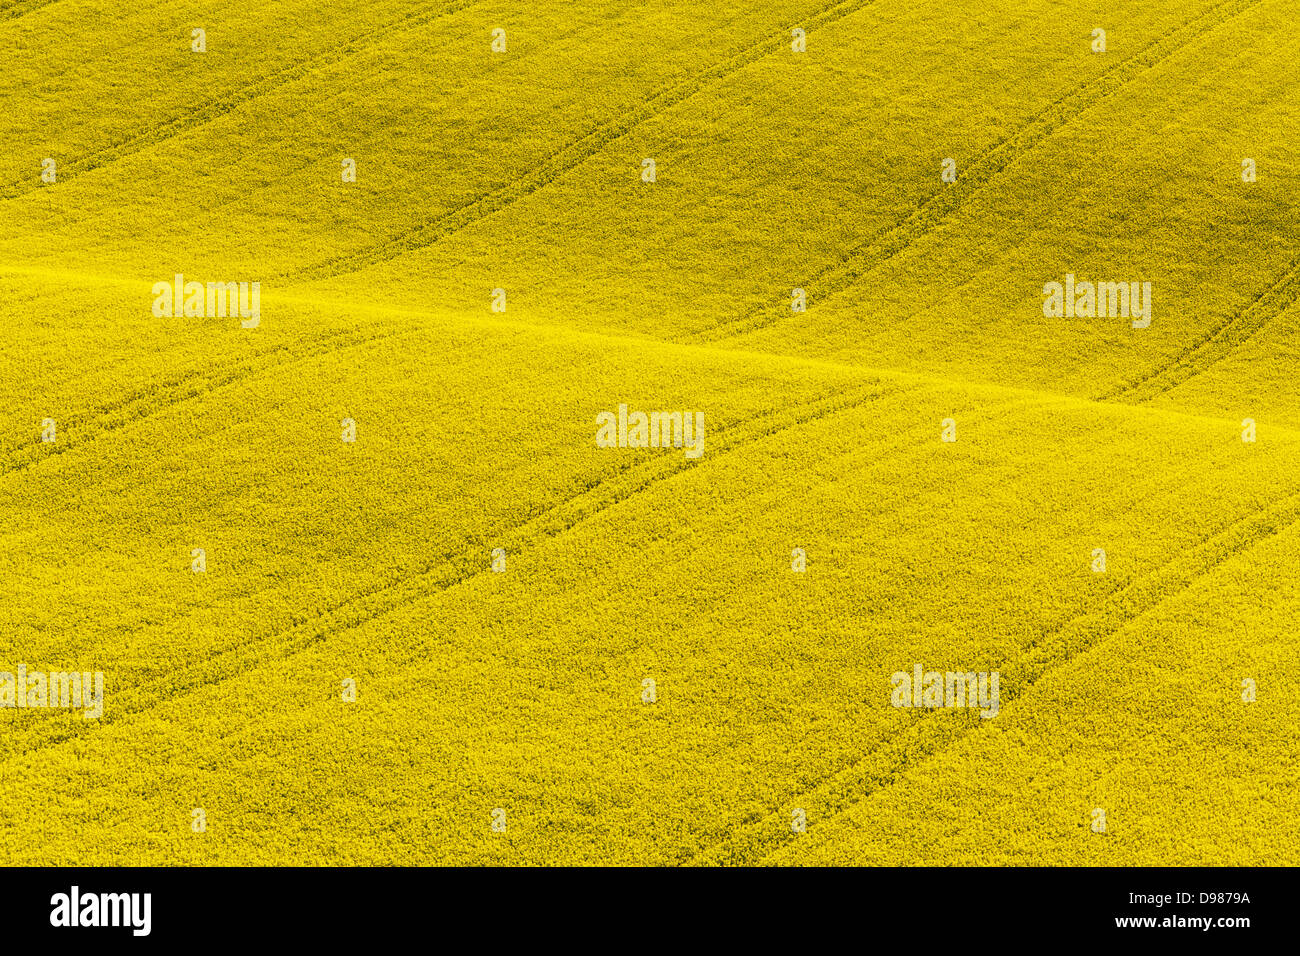 A rolling field on the South Downs national park in full bloom with yellow rapeseed. Stock Photo